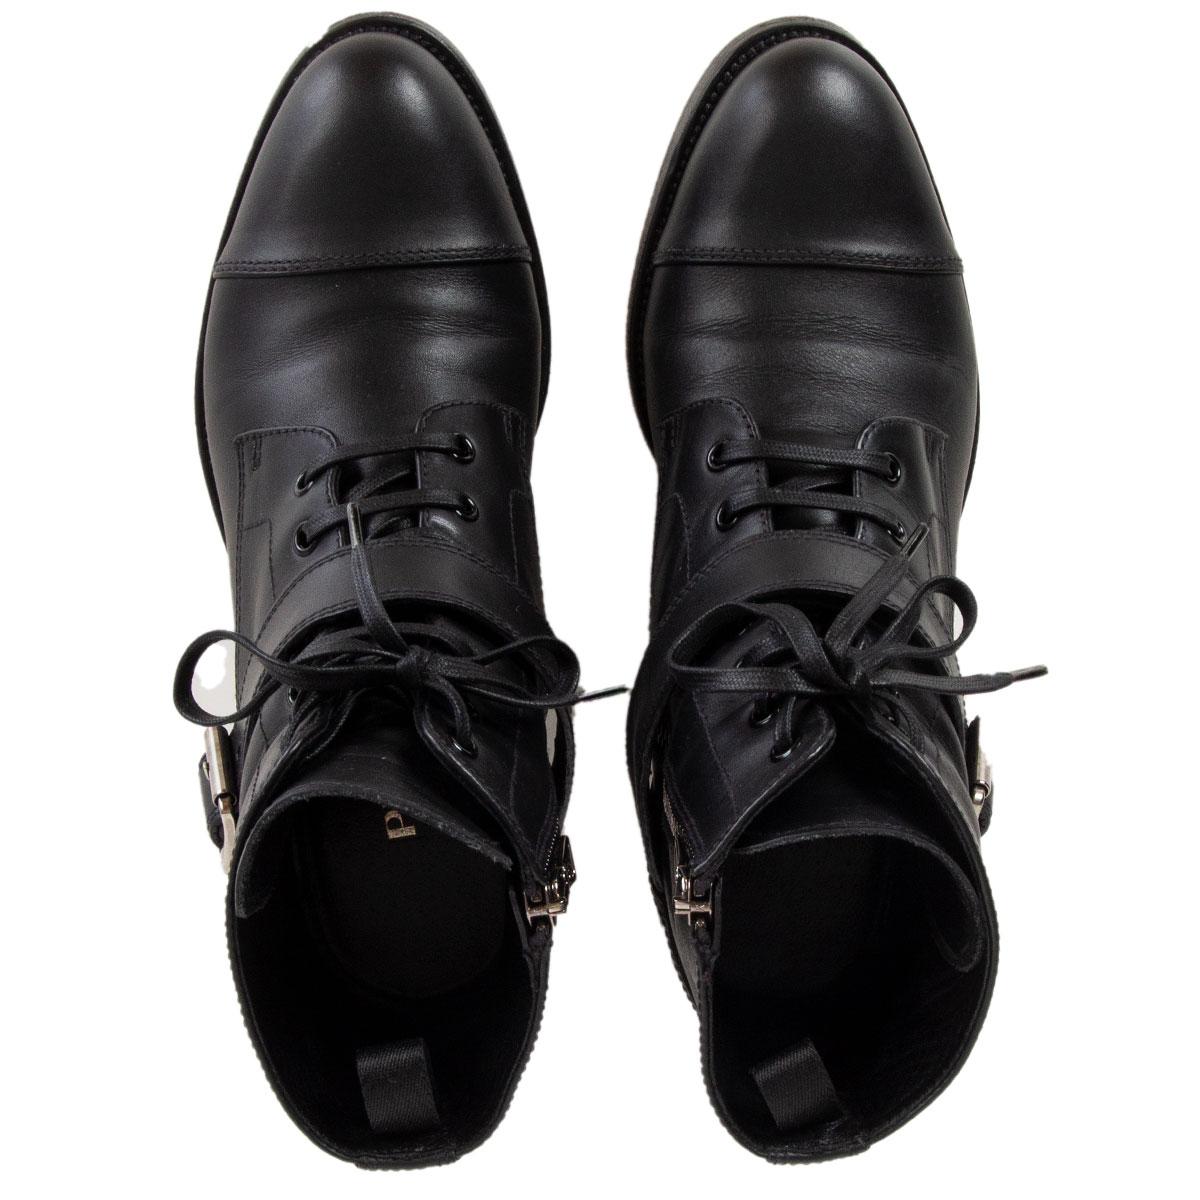 PRADA black leather Monk Strap Lace-up Ankle Boots Shoes 38.5 In Excellent Condition For Sale In Zürich, CH